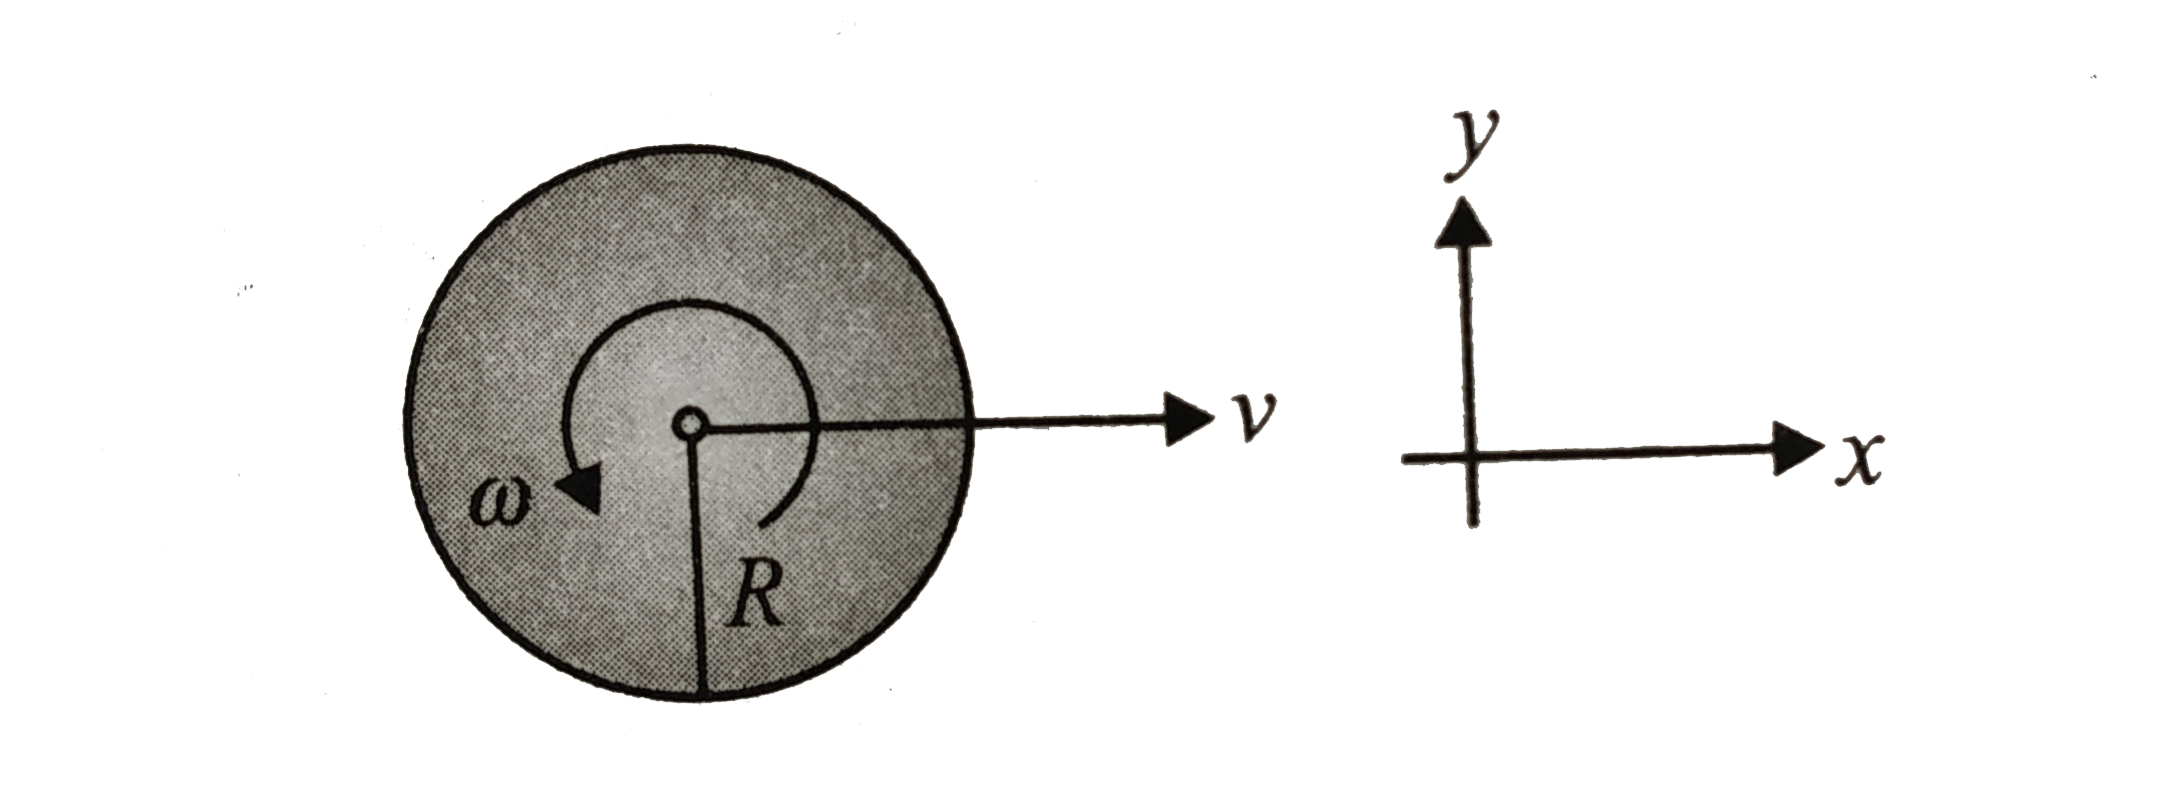 A basket ball of radius R is spun with an angular. vecomega=omegahatk and its CM moves with a speed v. Find aerodynamic lift experienced by the ball. Assume = density of air.